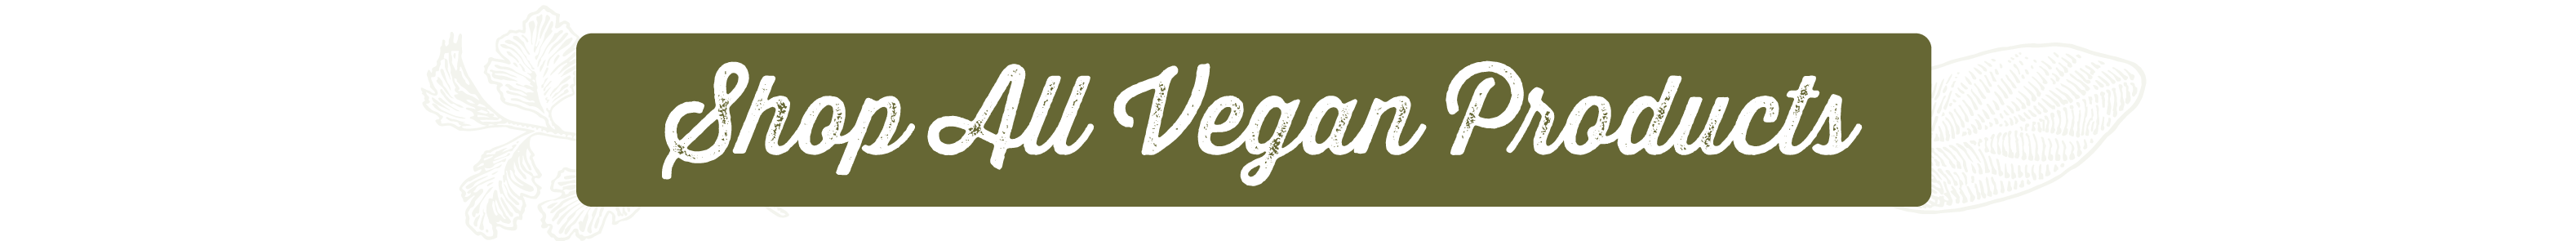 shop all vegan products